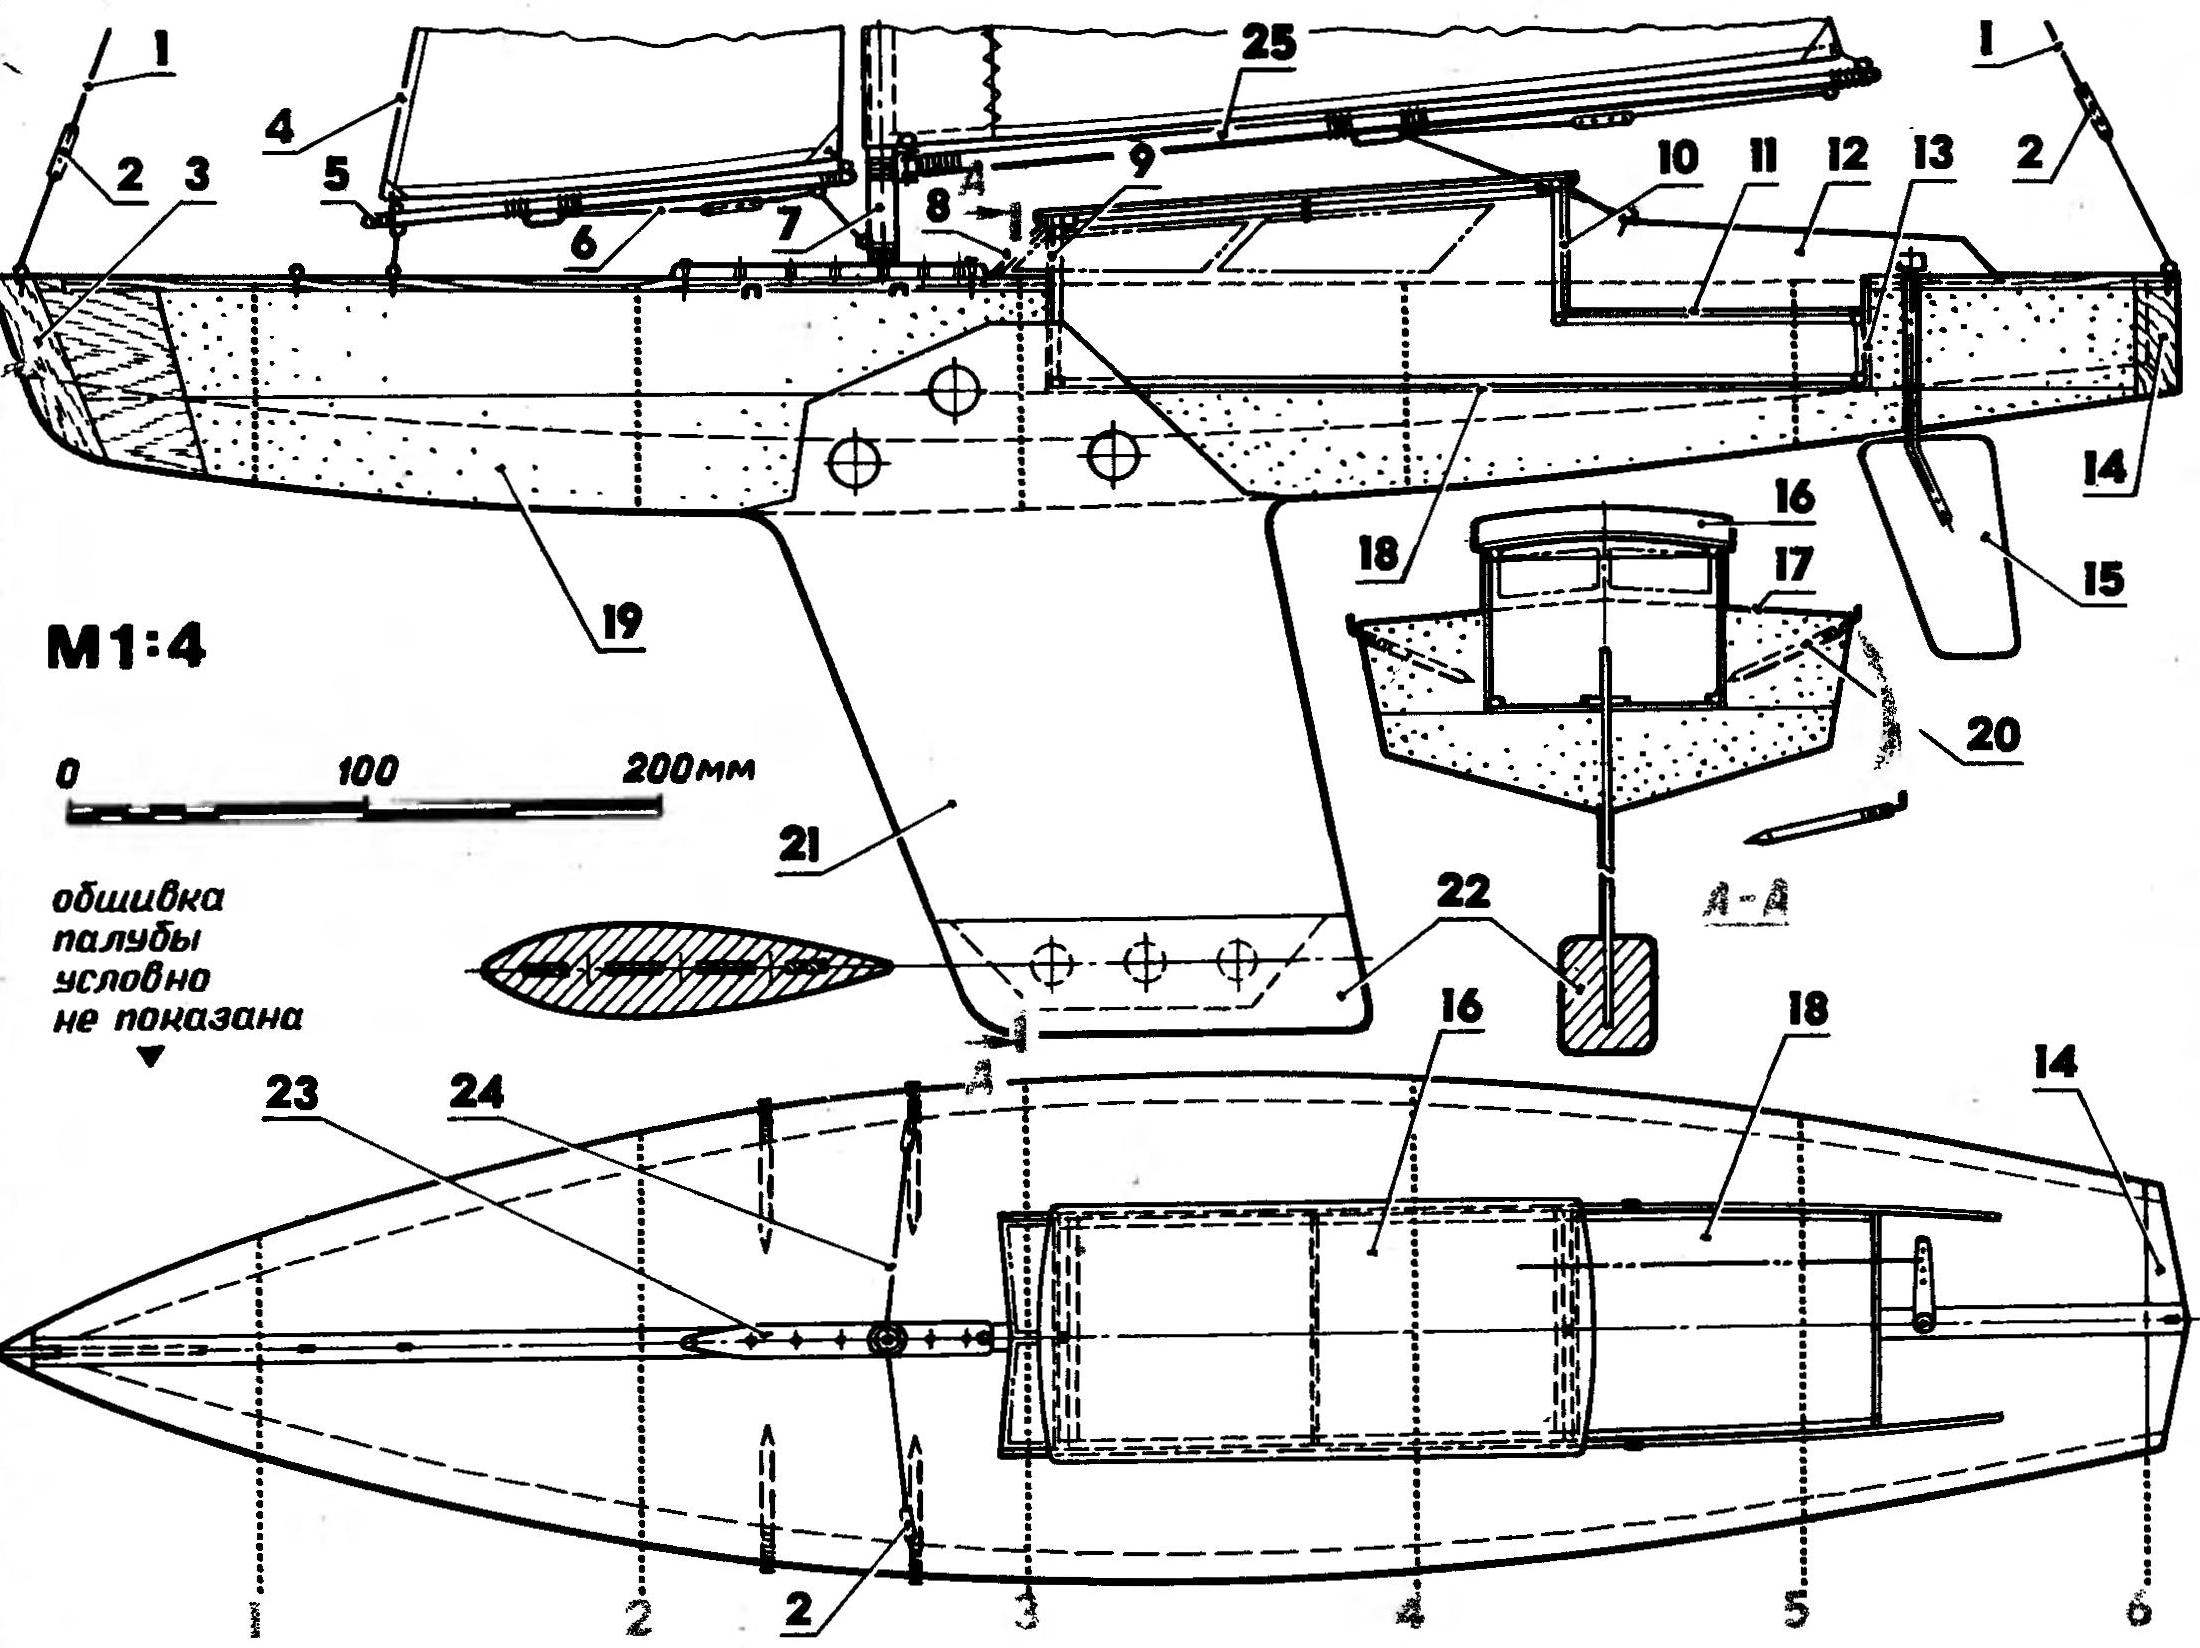 P and P. 3. Design yacht model